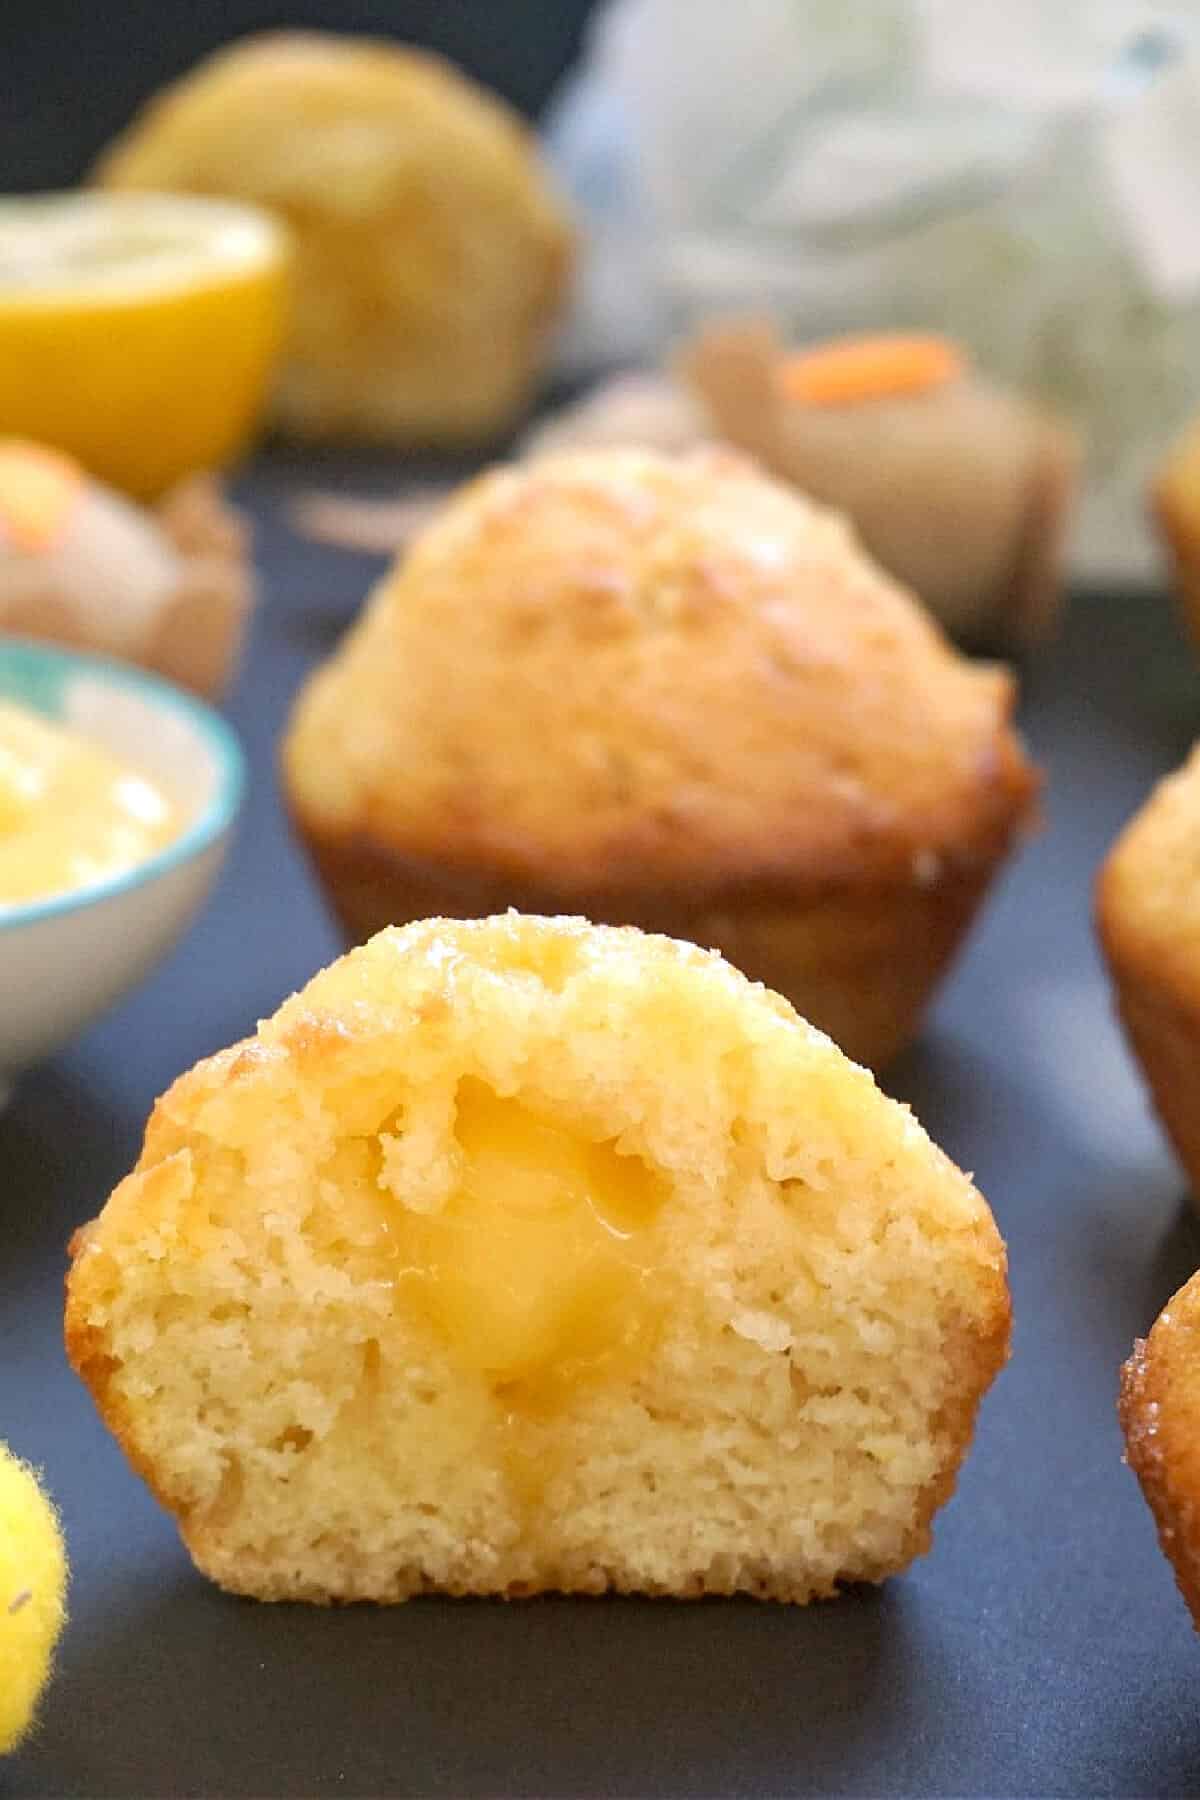 Half of a lemon muffin with lemon curd filling with other muffins in the background